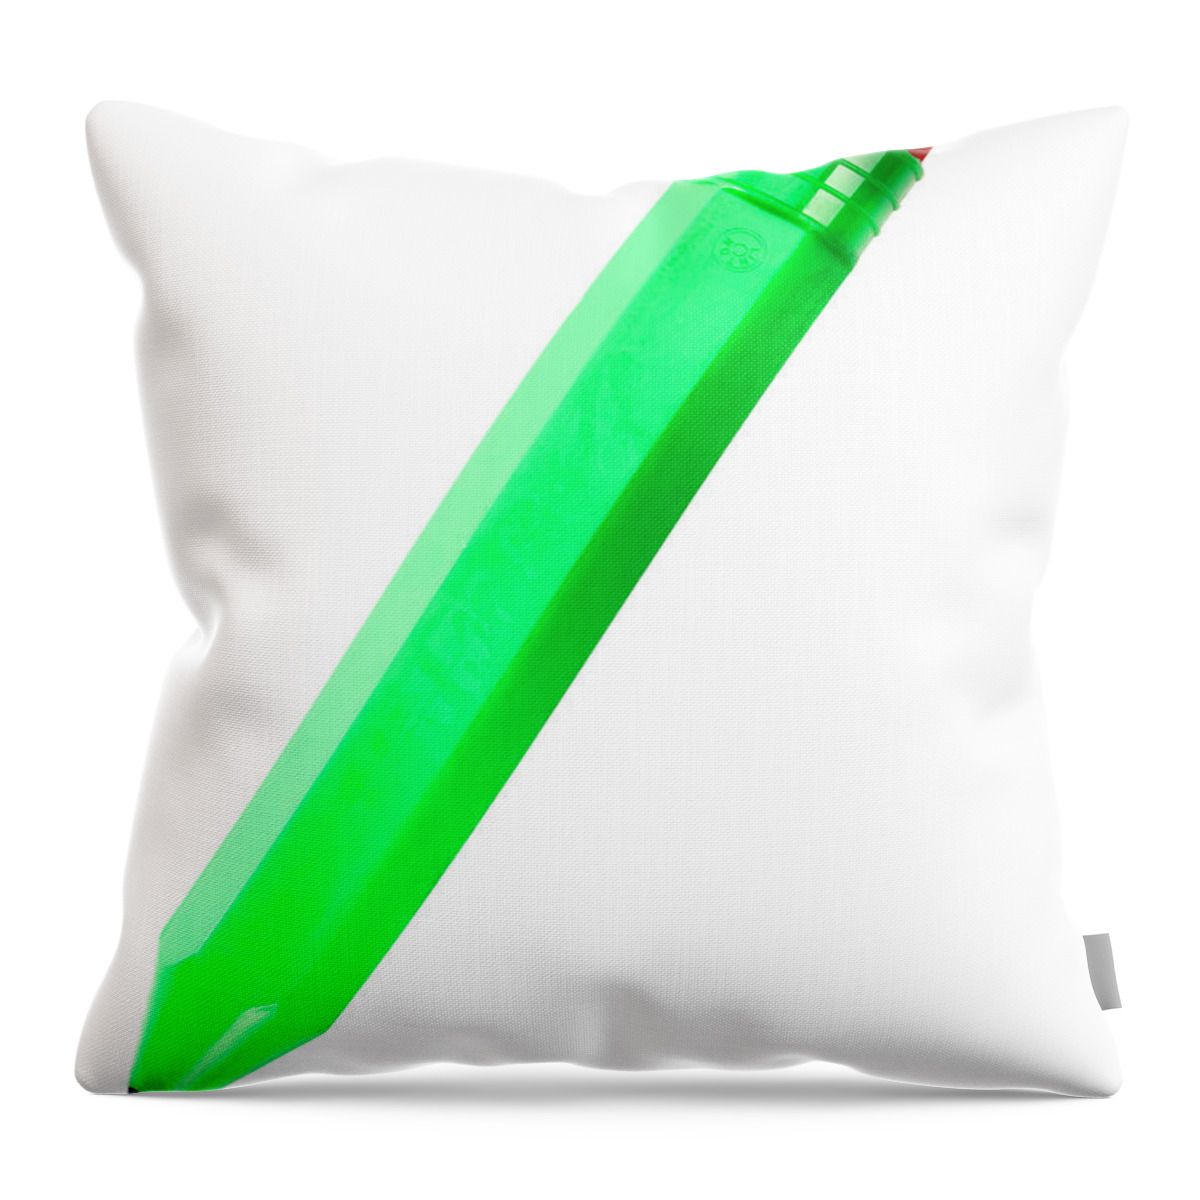 Art Throw Pillow featuring the drawing Green Pencil by CSA Images